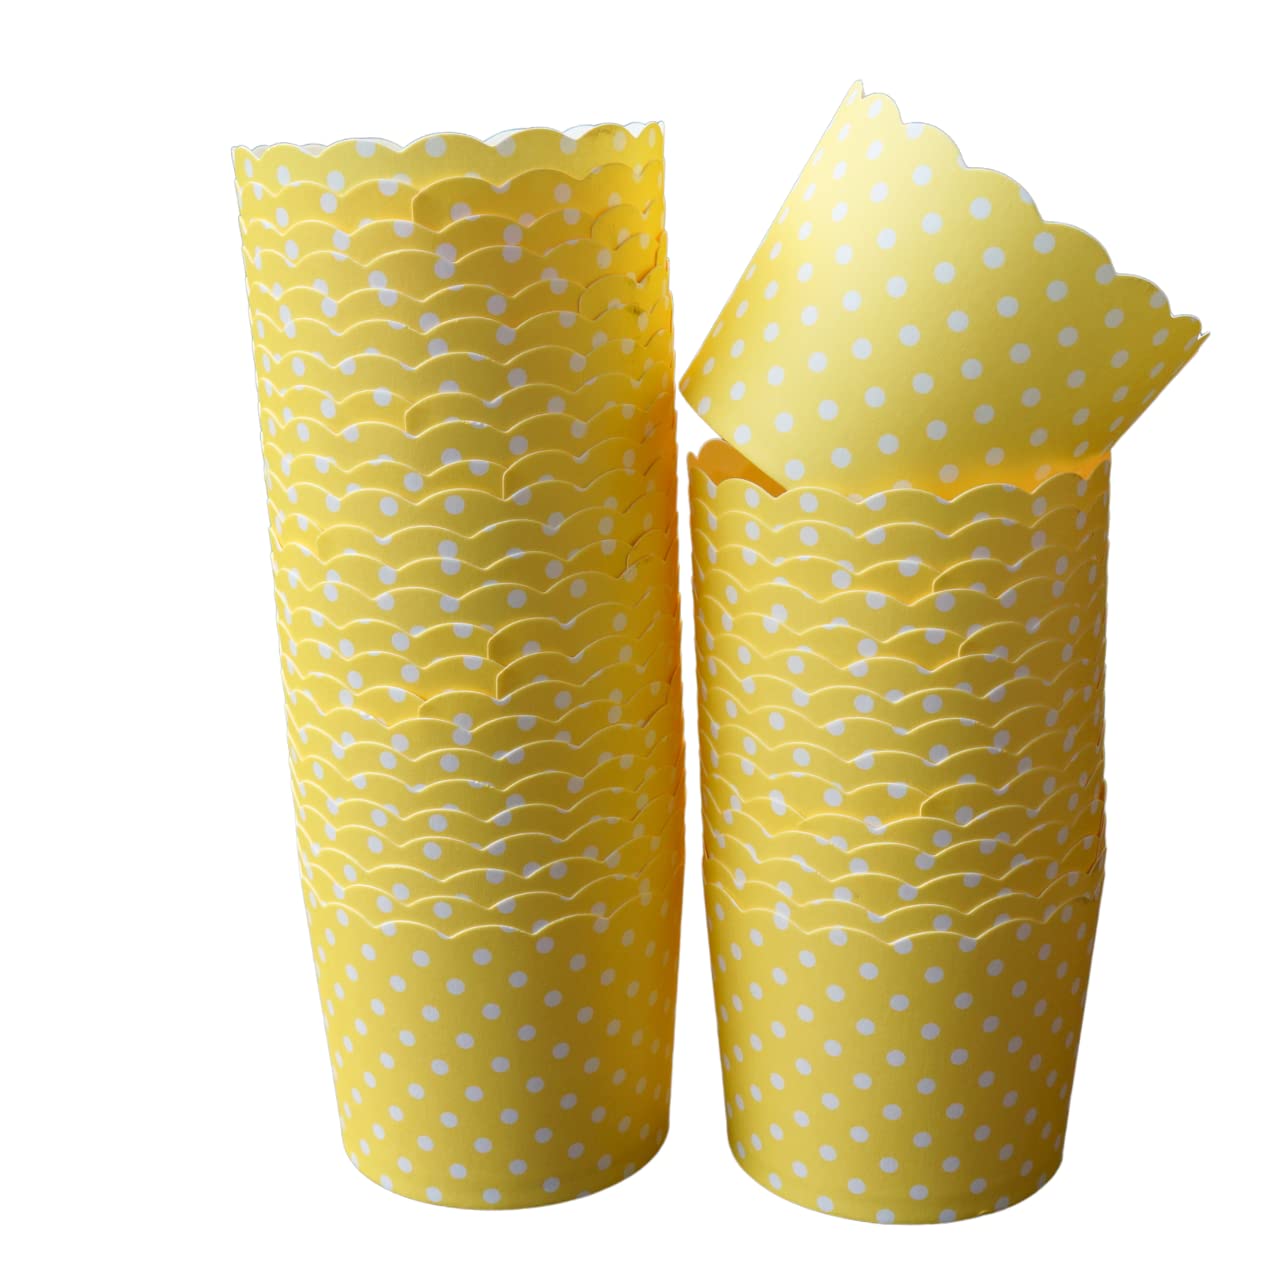 BAKE-IN-CUP 50-Pack Paper Baking Cups, Greaseproof Disposable Cupcake Muffin Liners (Large, Yellow Polka Dots)